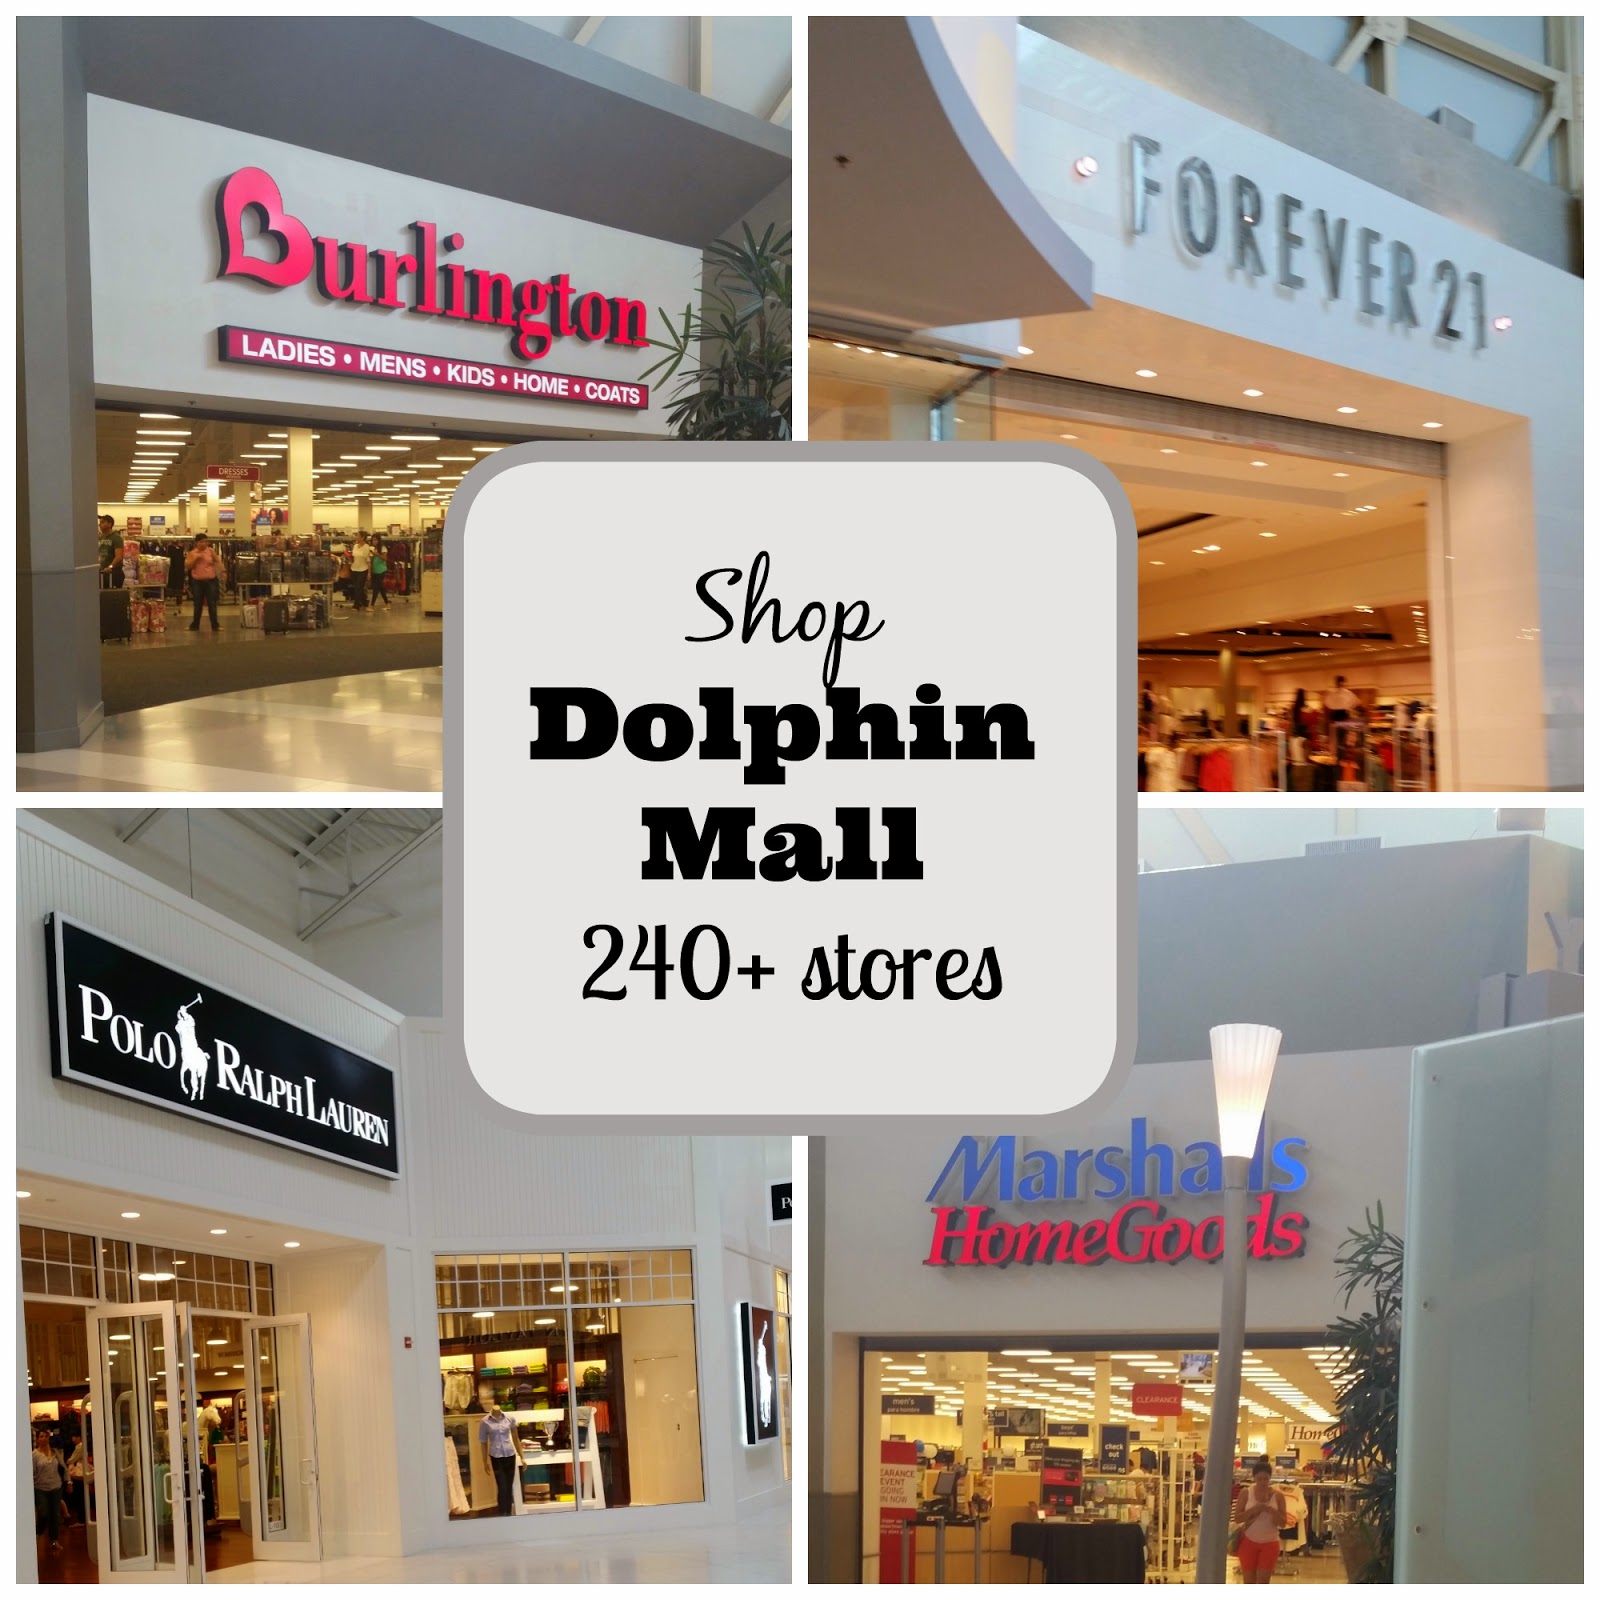 Second Chances Girl - a Miami family and lifestyle blog!: Dolphin Mall:  Shopping, Dining & Entertainment For The Whole Family-Plus a $250 GC  Giveaway